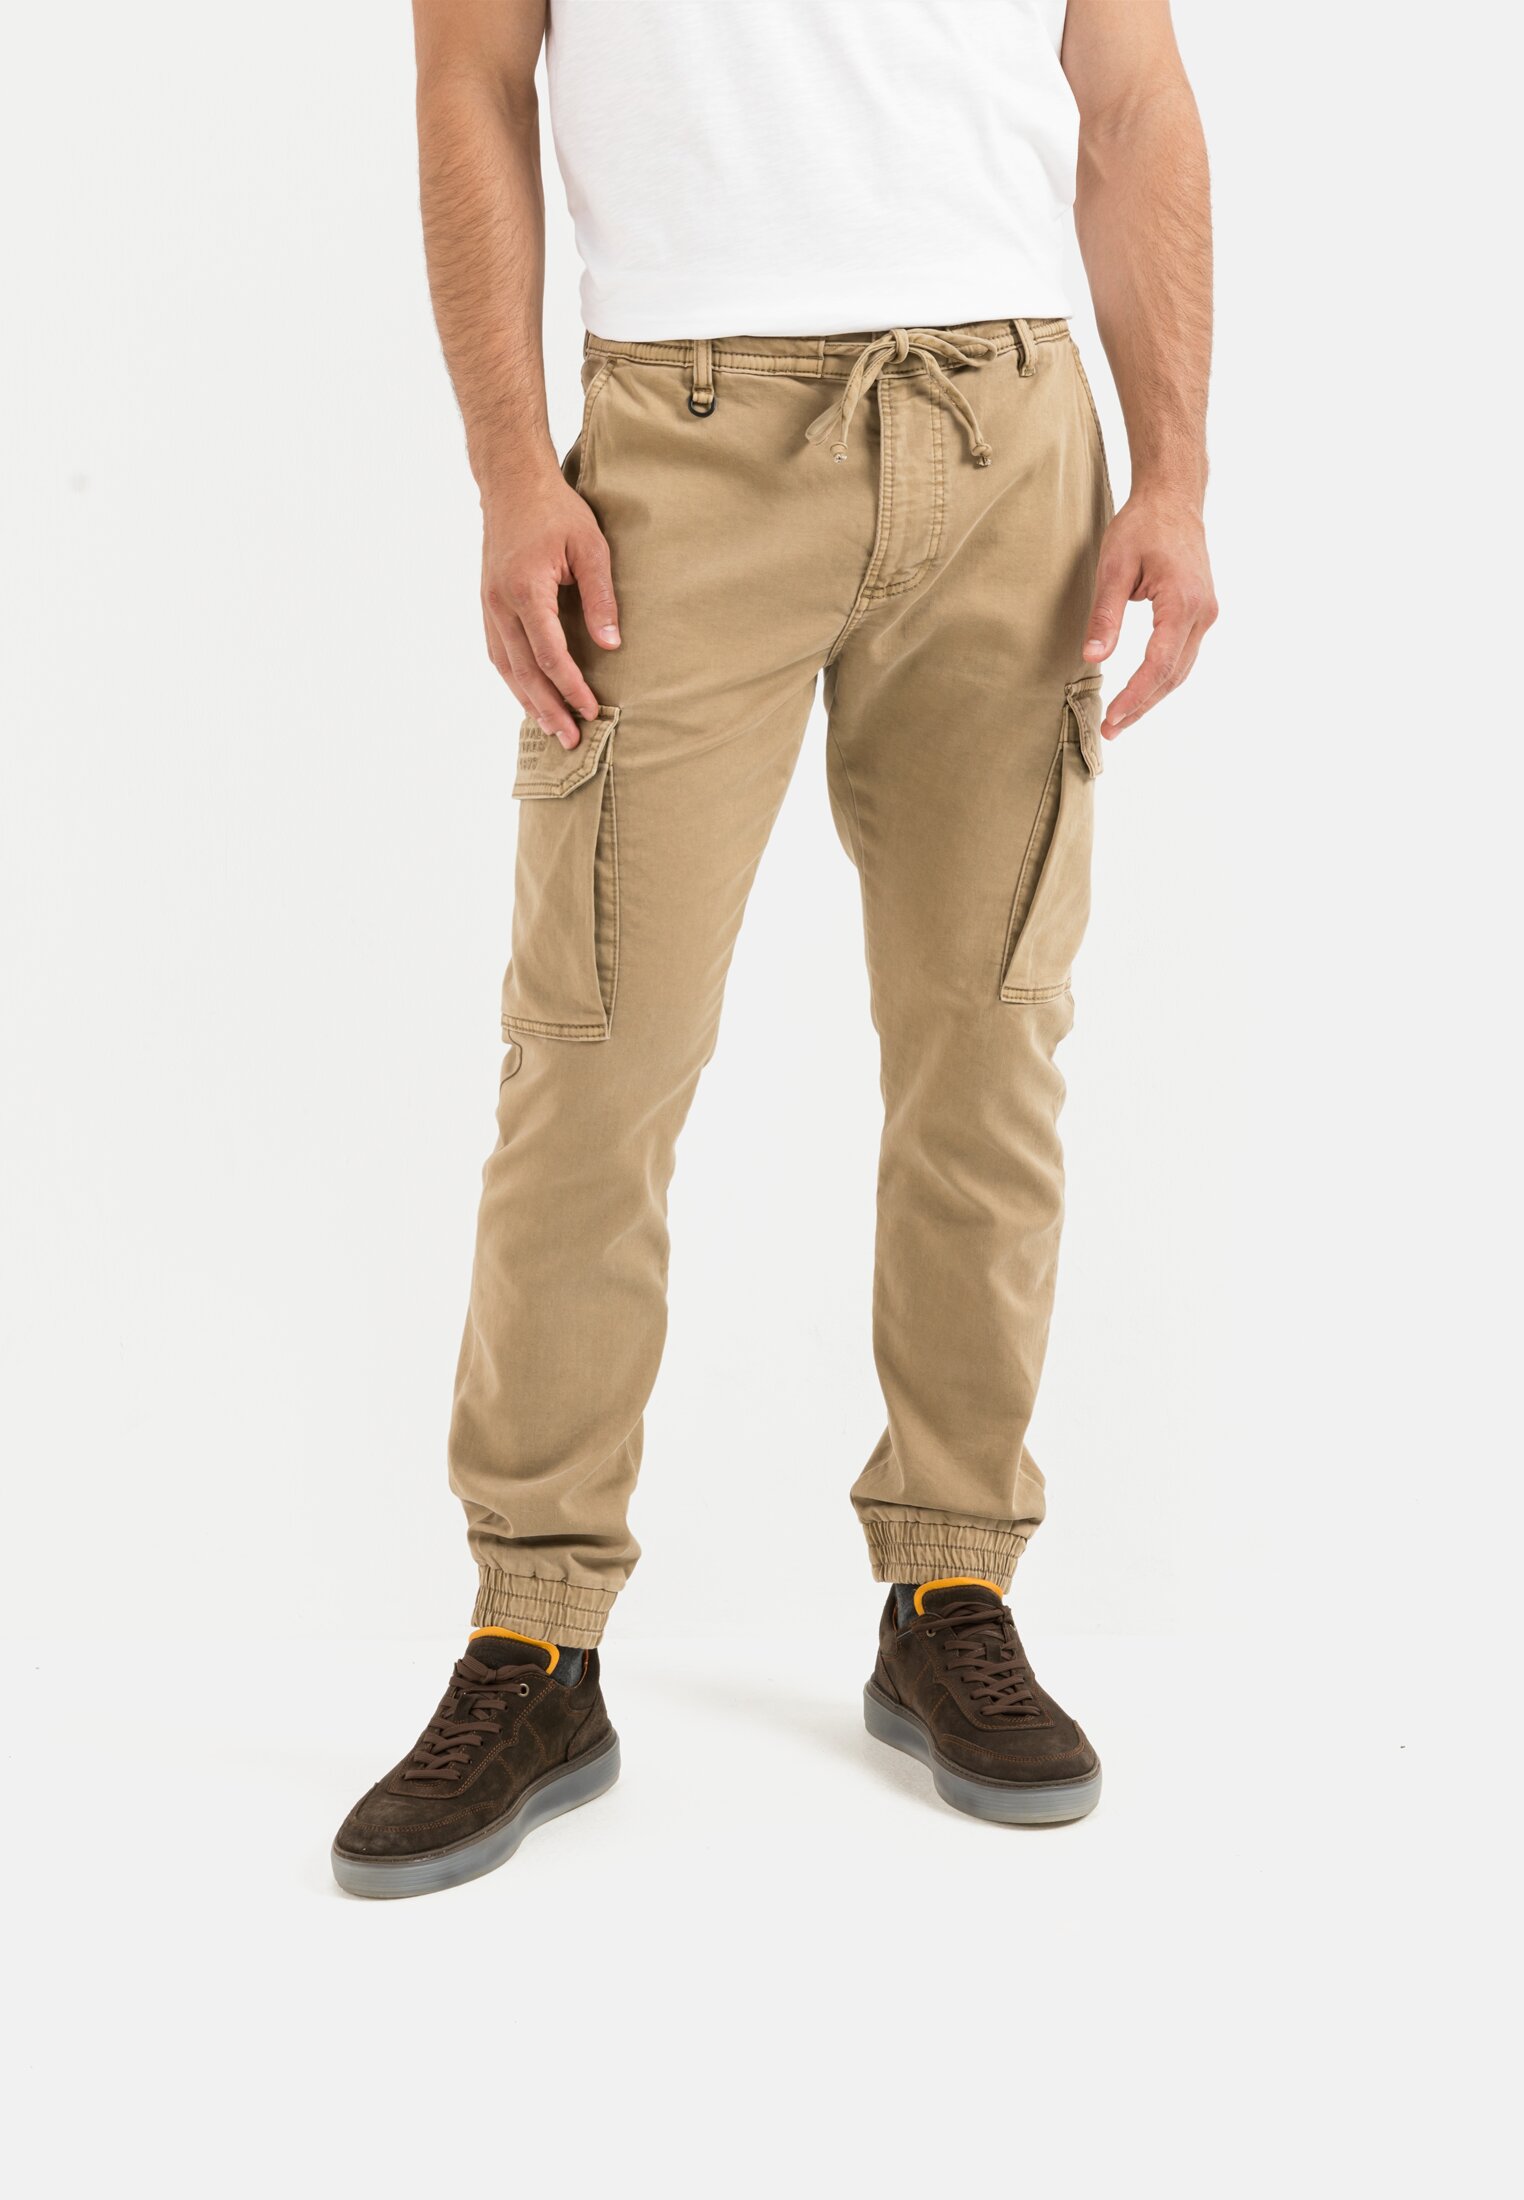 Camel Active Cargo pants in Tapered fit